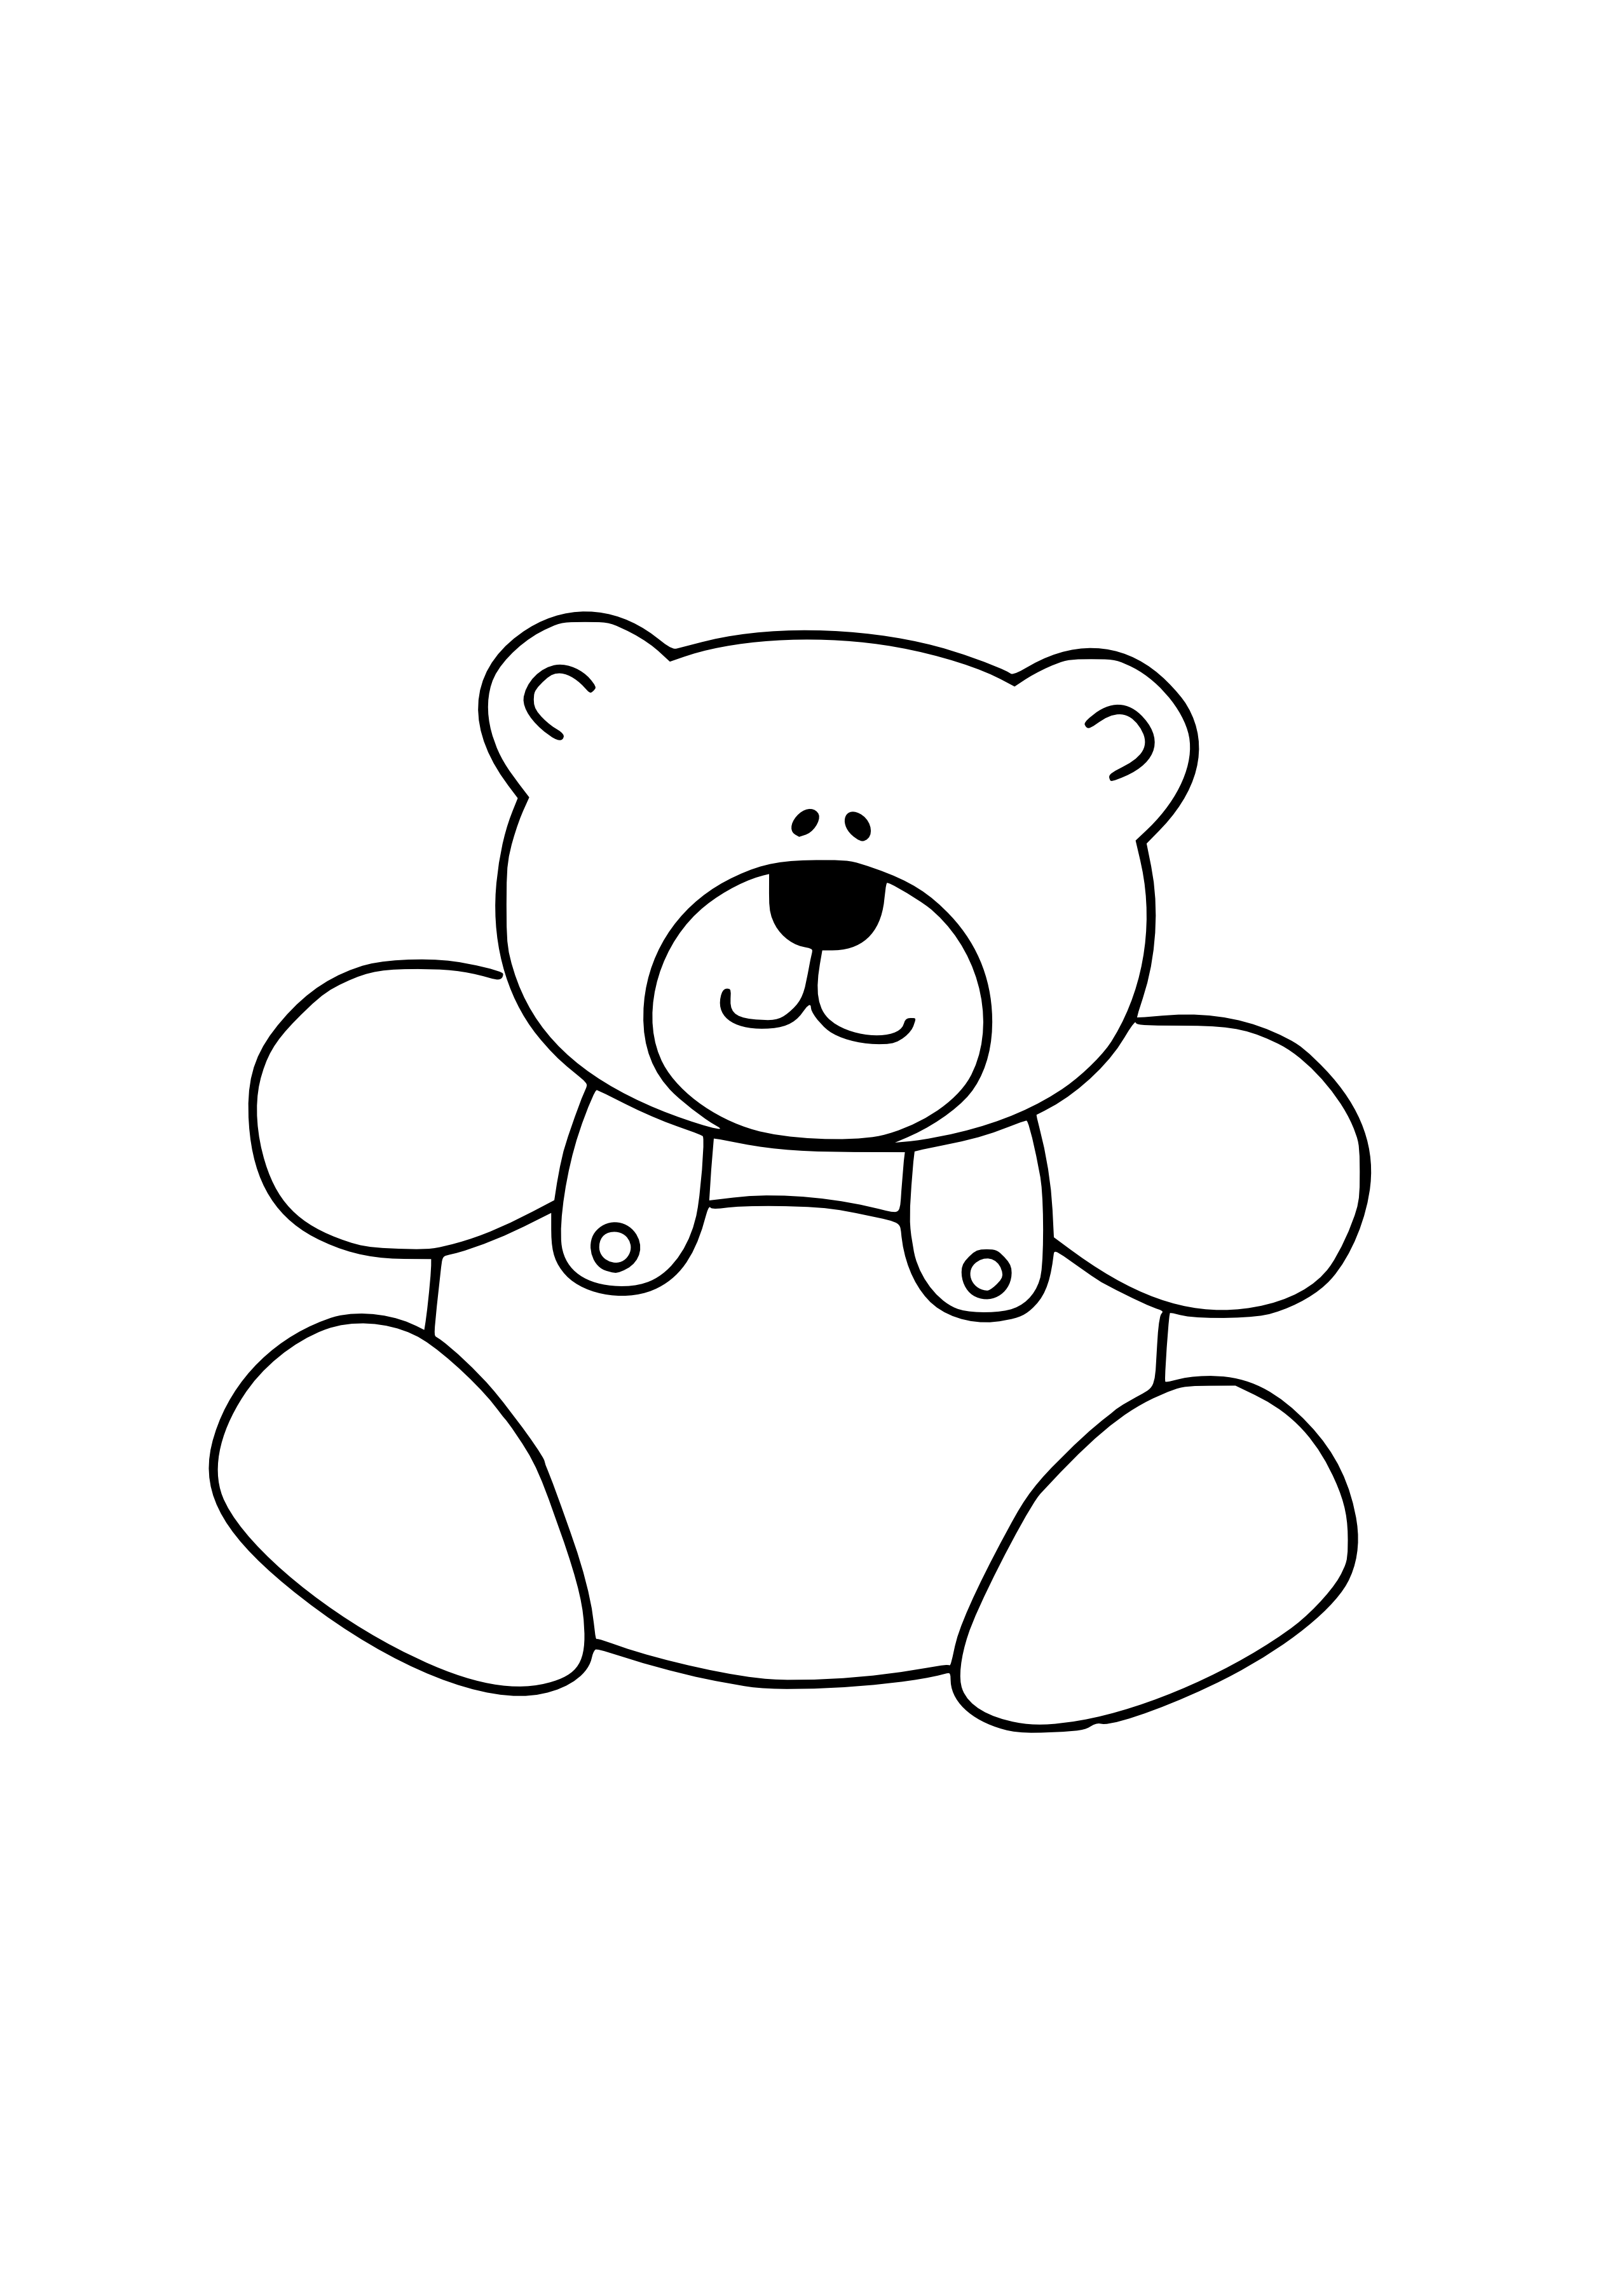 free-teddy-bear-outline-download-free-teddy-bear-outline-png-images